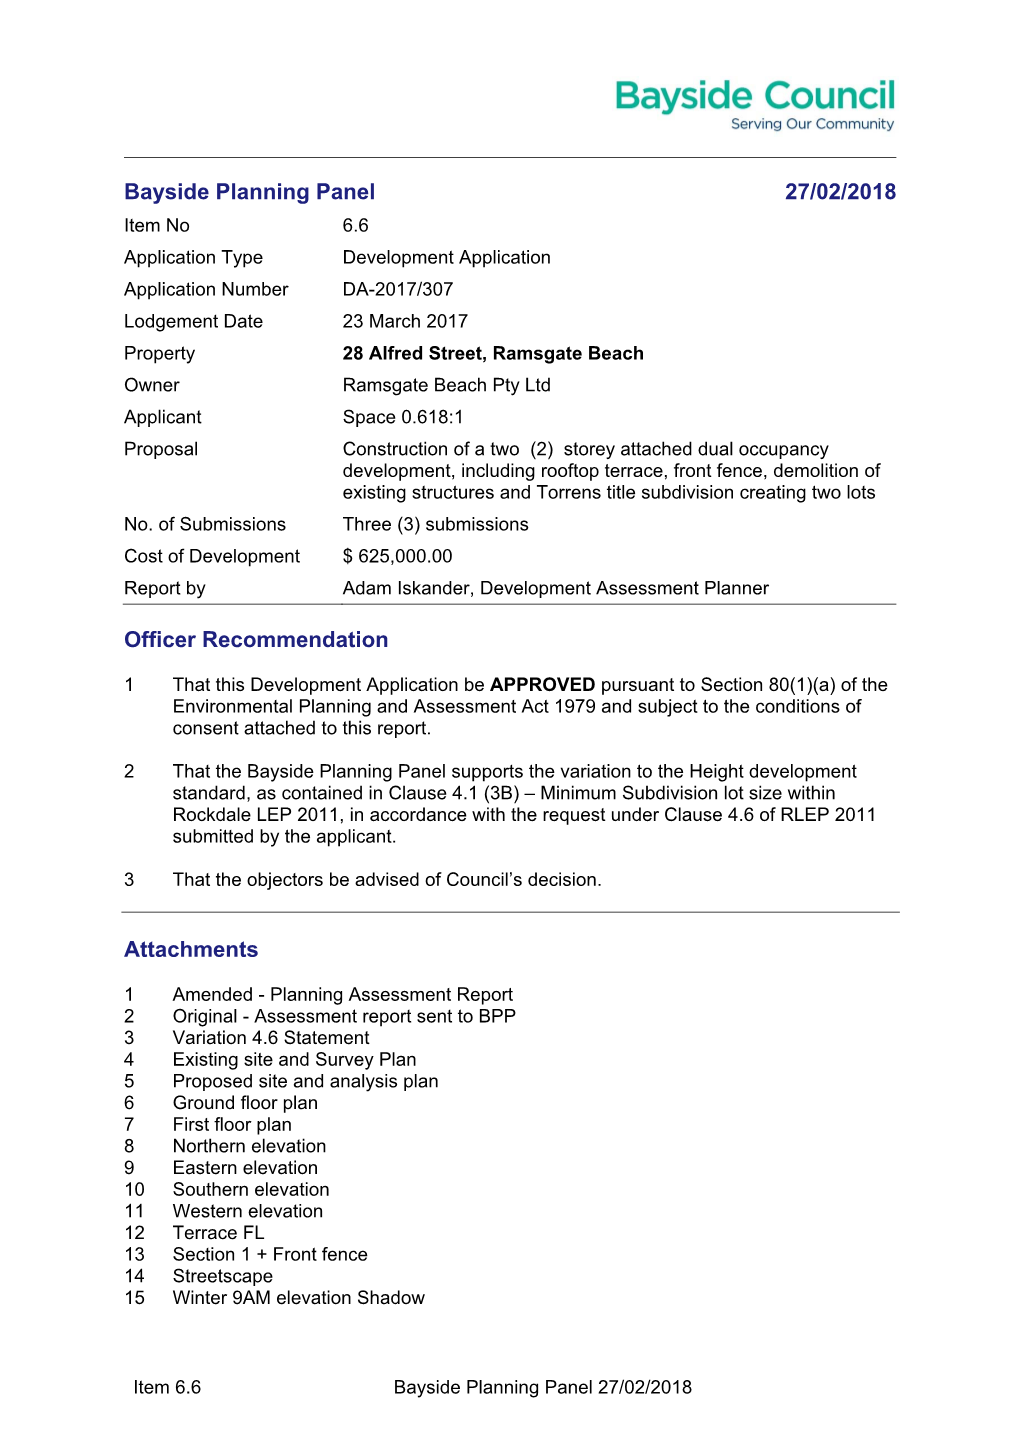 Bayside Planning Panel 27/02/2018 Officer Recommendation Attachments